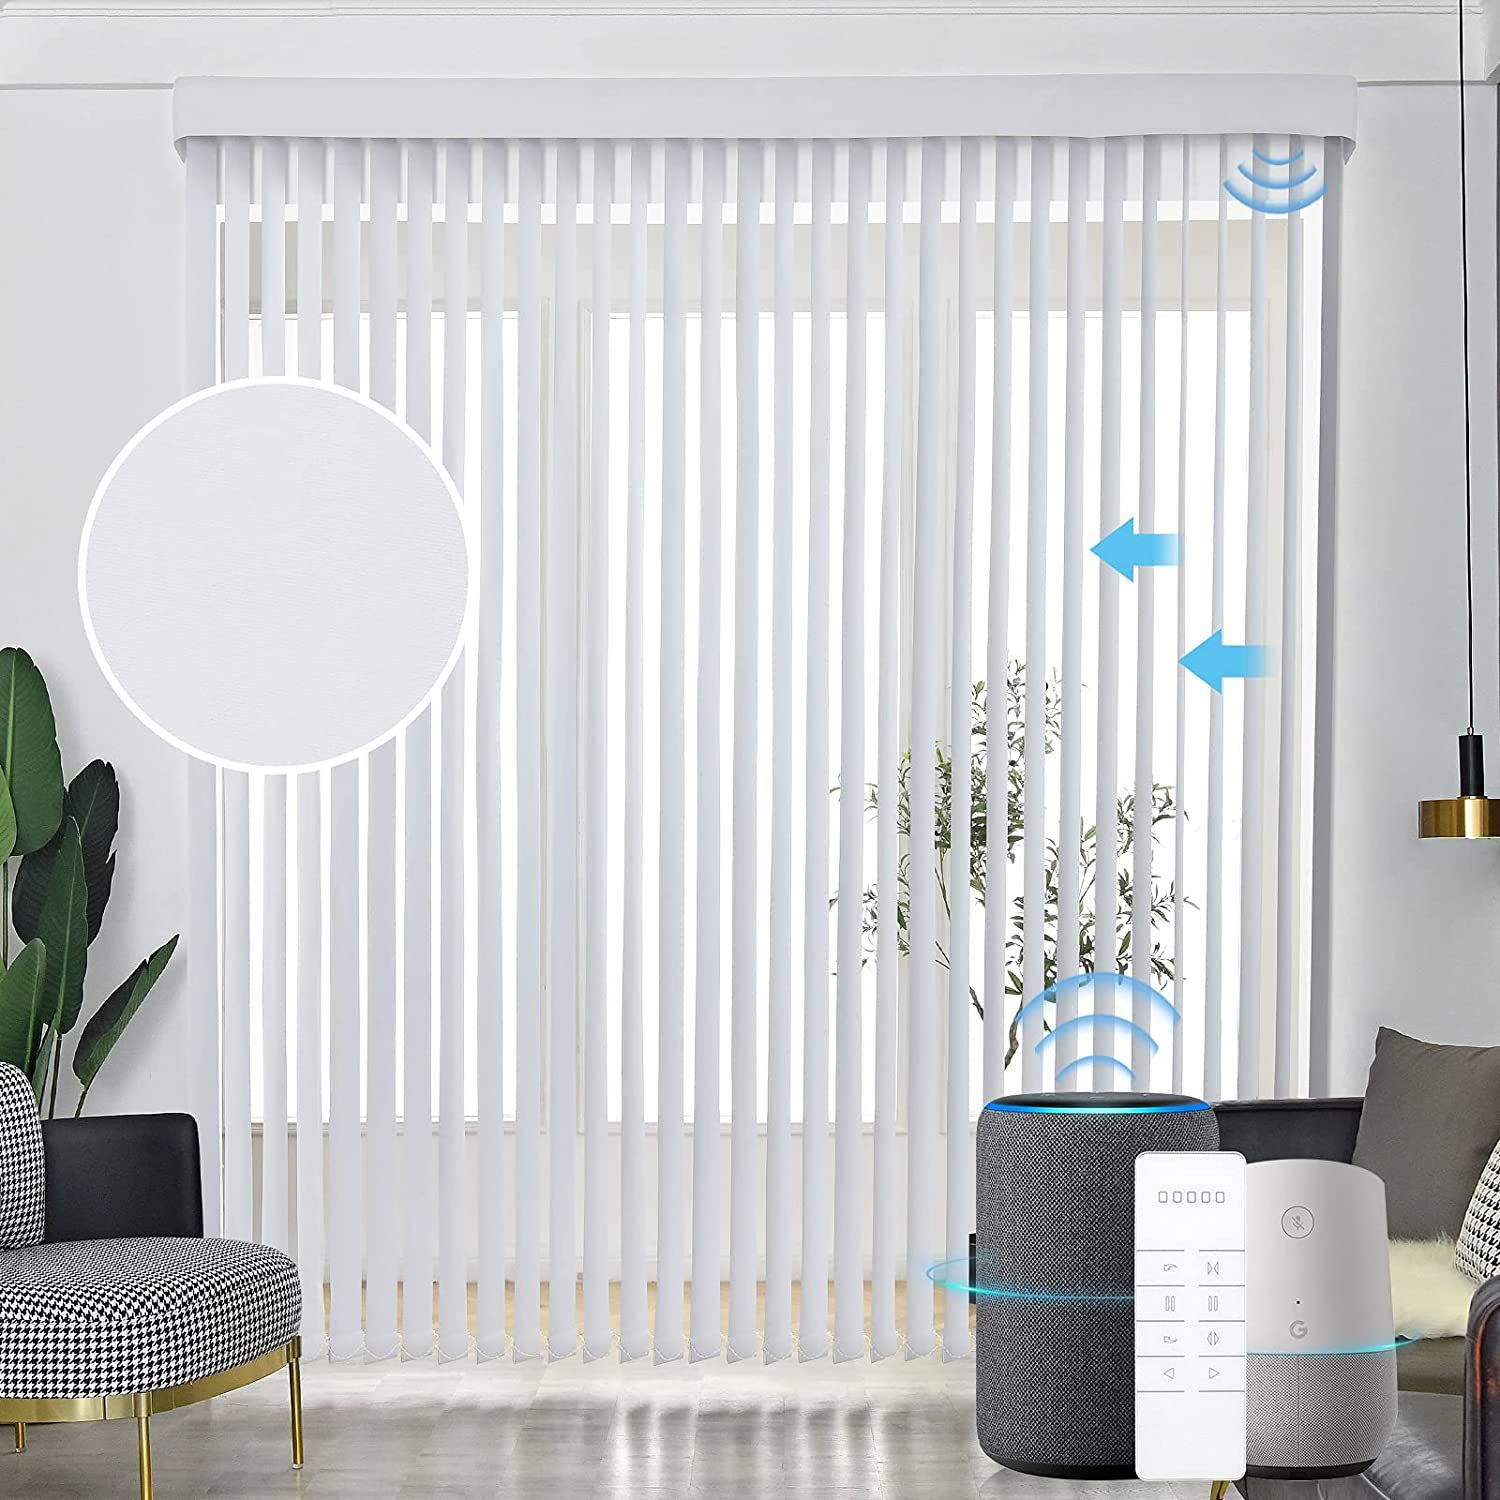 The Best Smart Blinds for Your Home